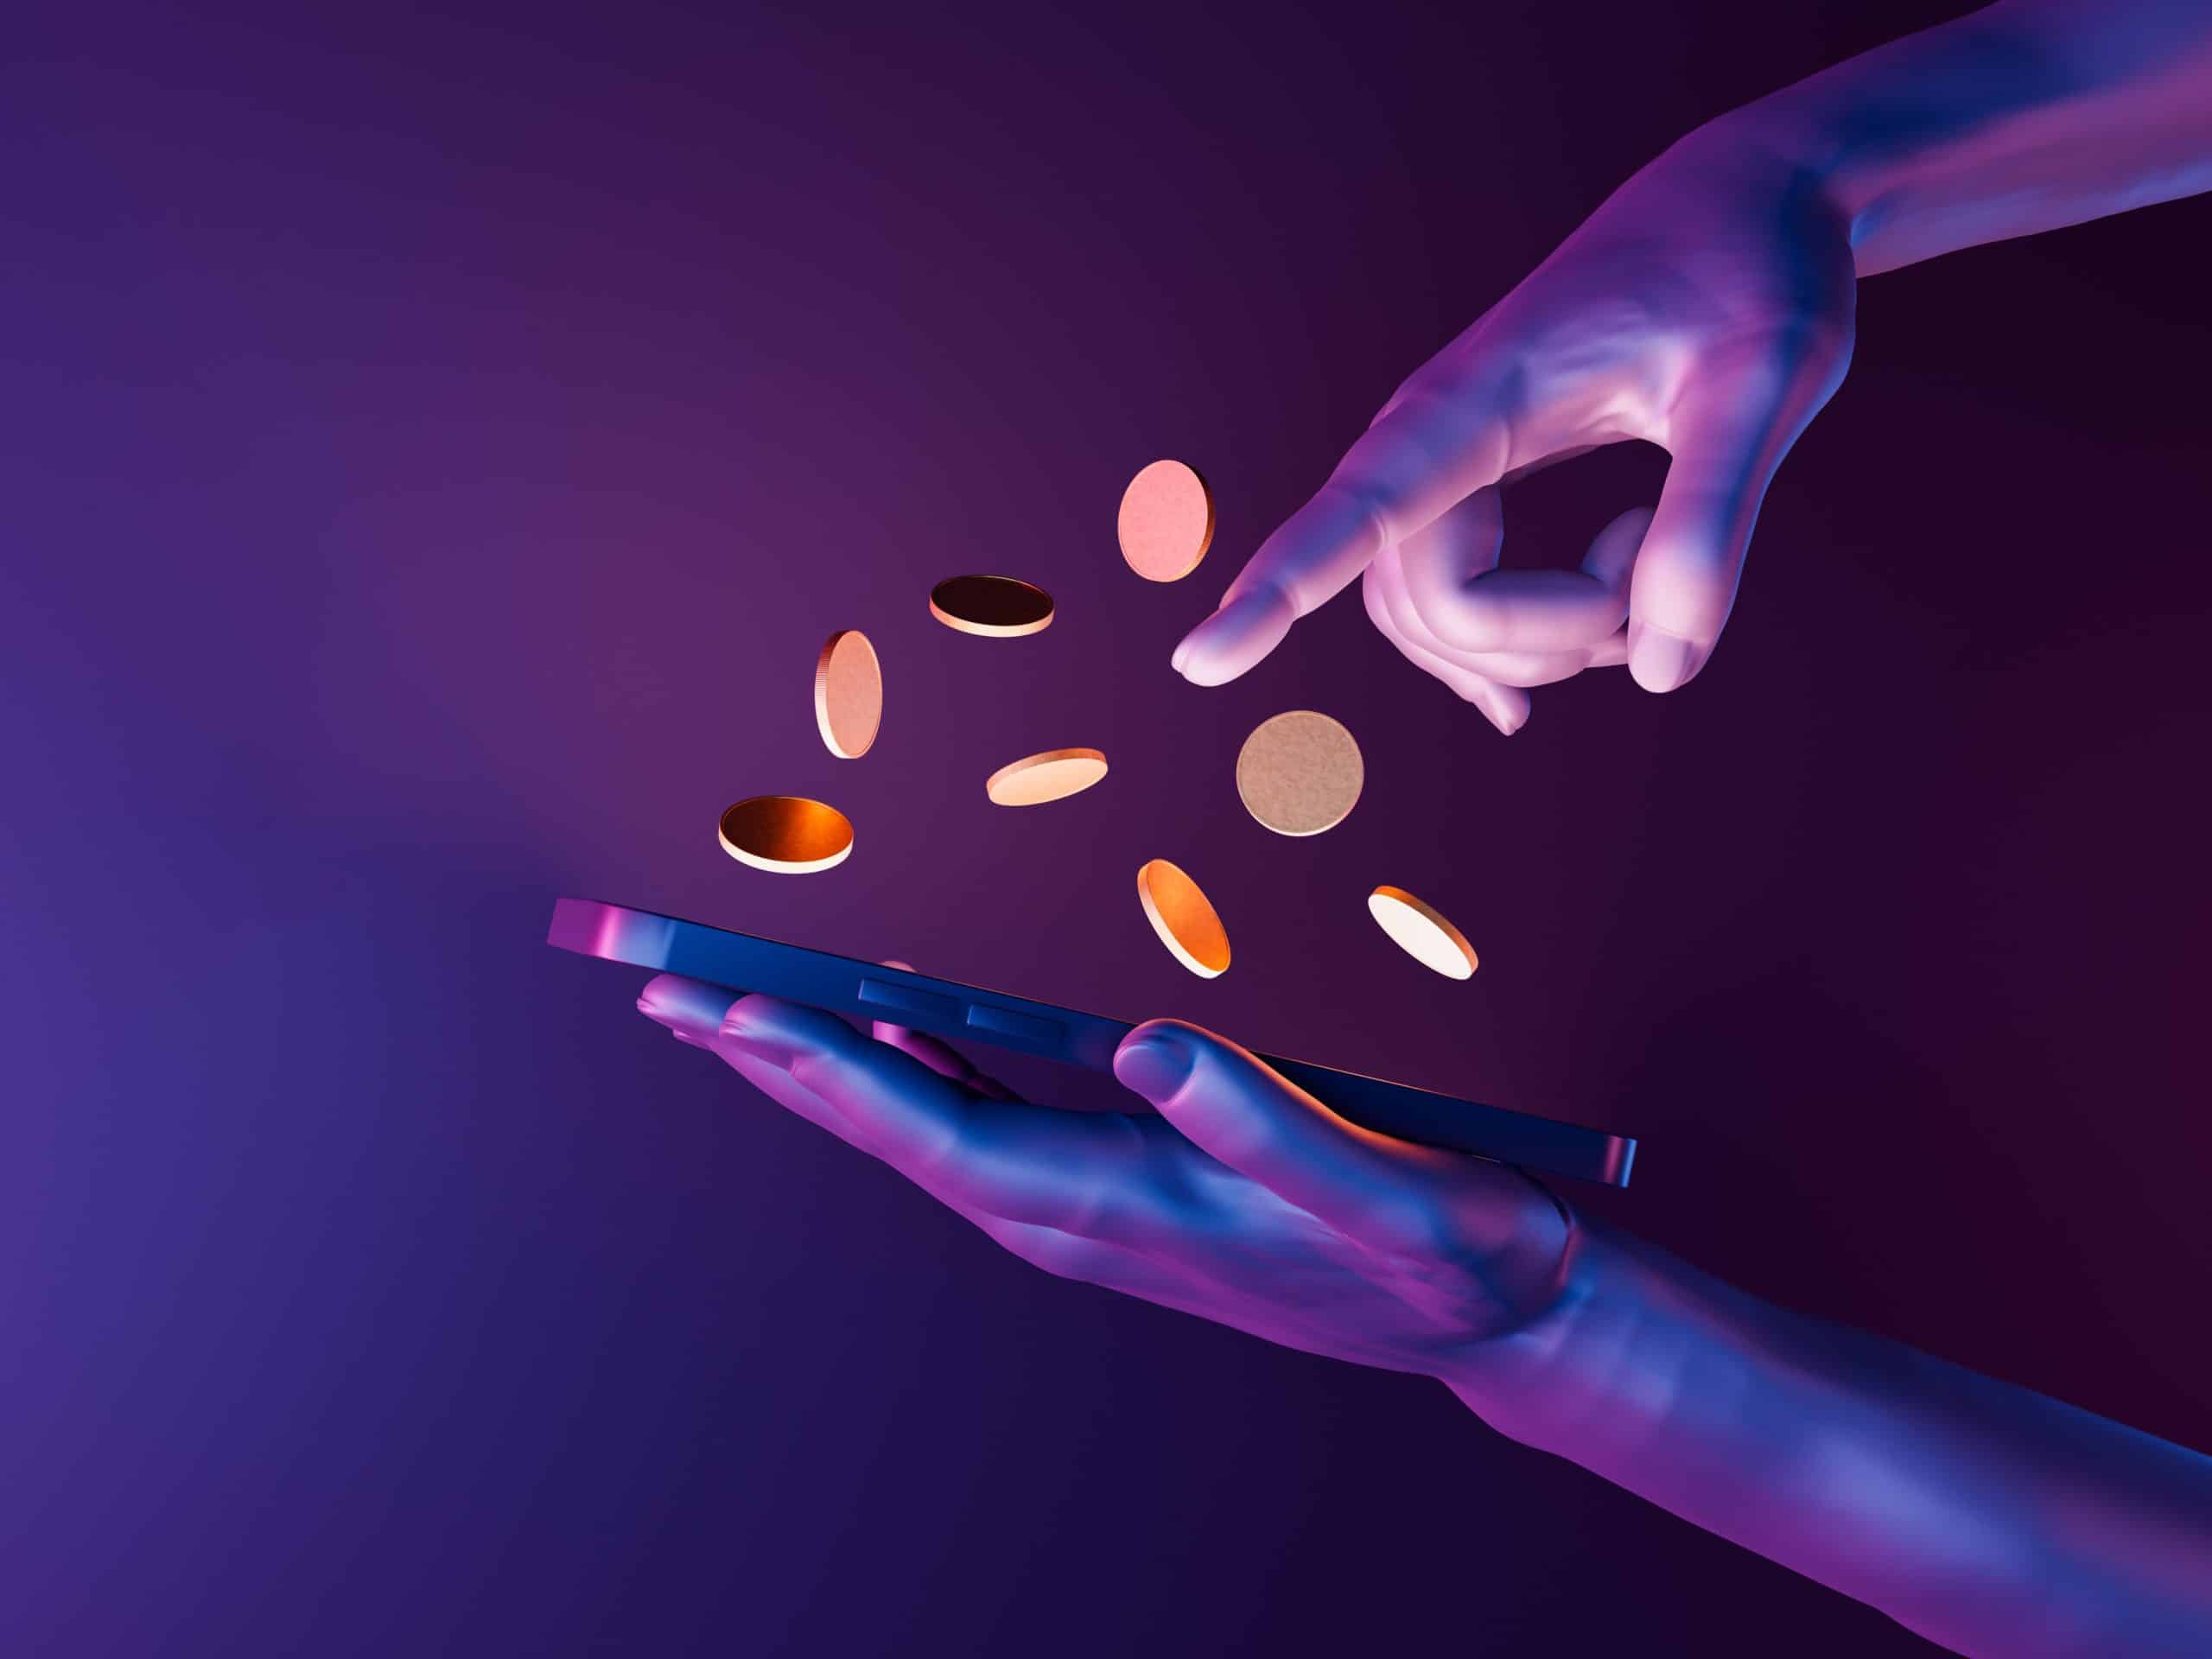 3d,Hands,Holding,A,Cell,Phone,With,Coins,On,The